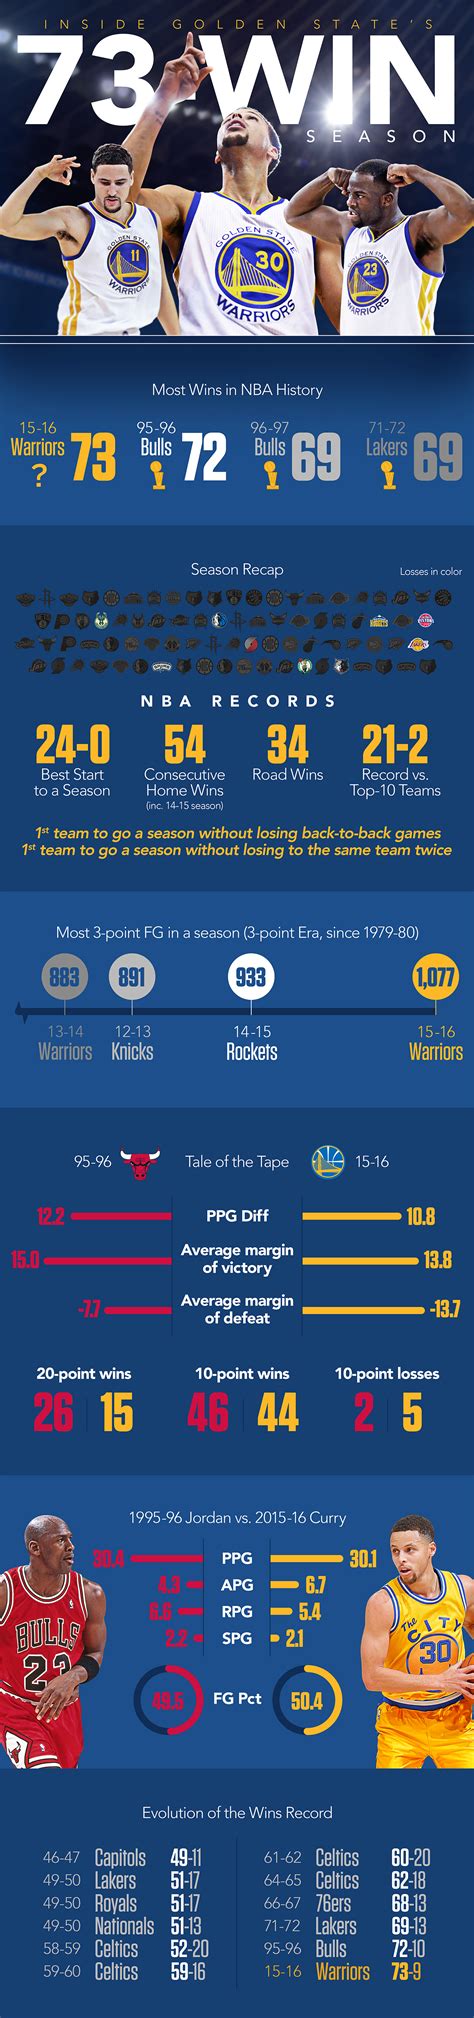 golden state game stats